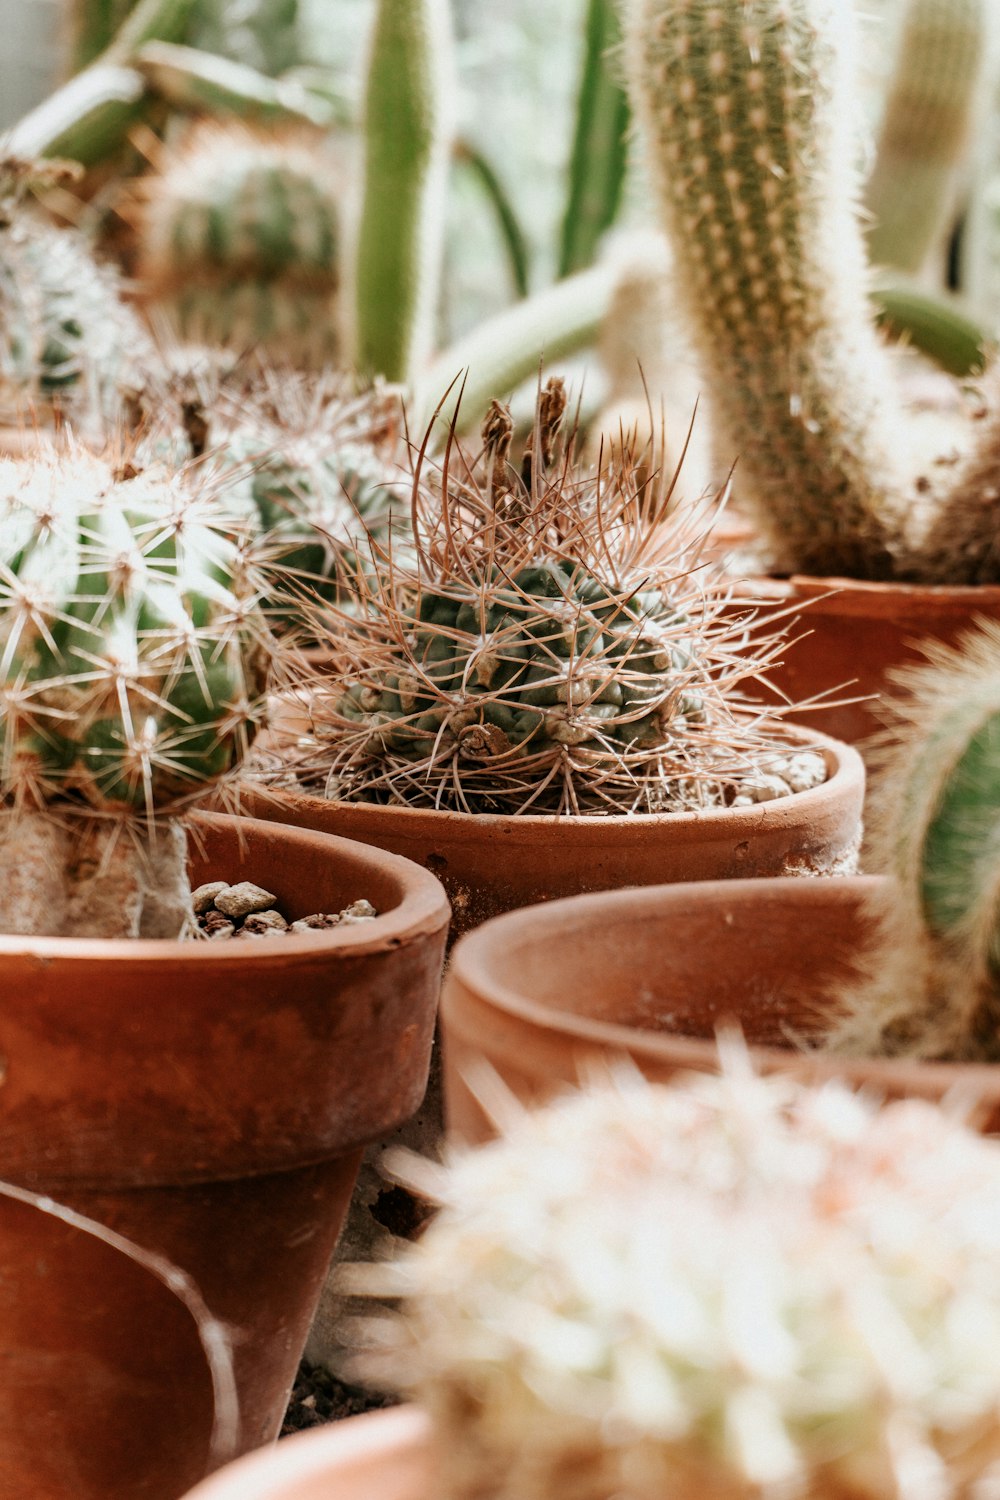 a group of cactus plants in pots on a table